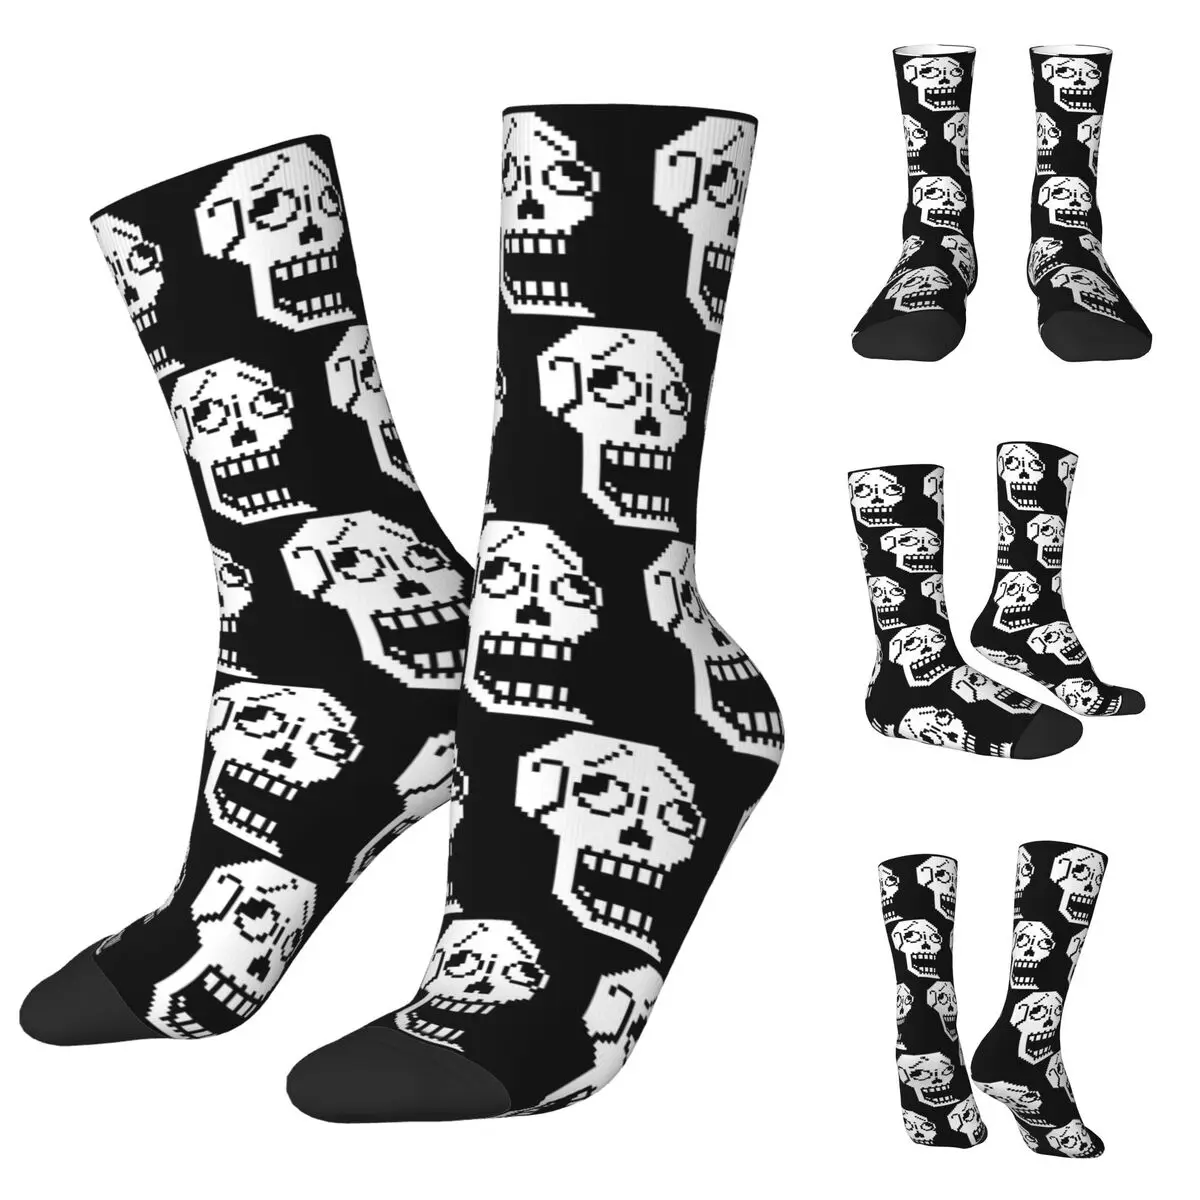 Sans And Papyrus Sprites Undertale Napstablook Men and Women printing Socks,Windproof Applicable throughout the year